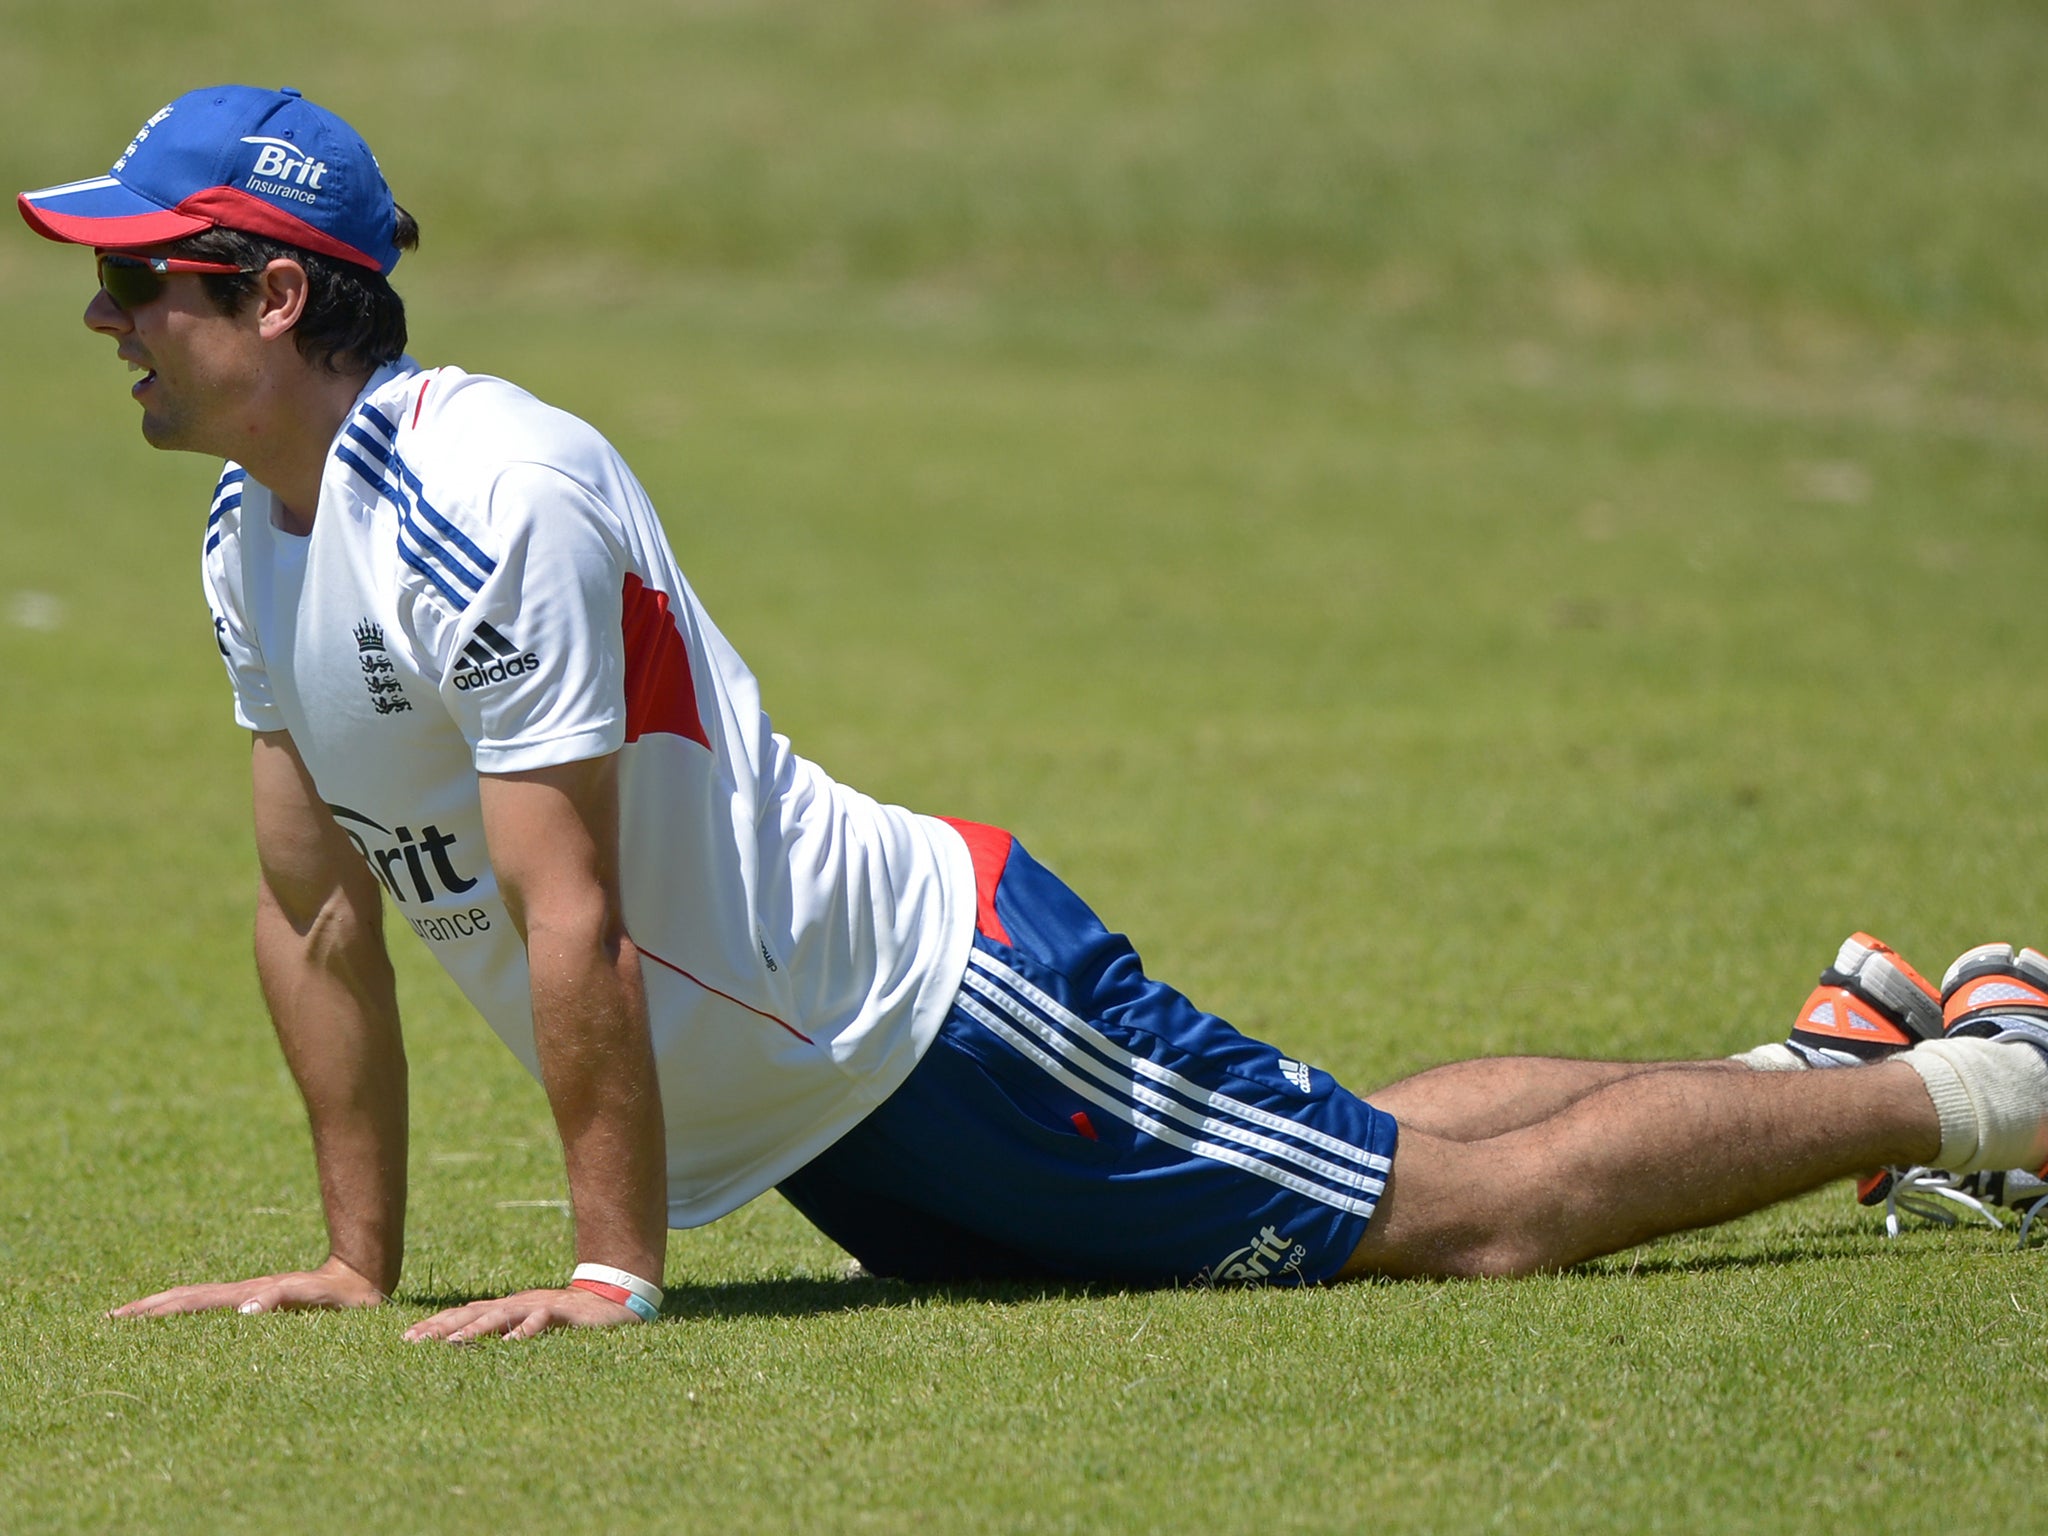 England captain Alastair Cook is likely to miss their first Ashes warm-up match against a Western Australia Chairman's XI on Thursday